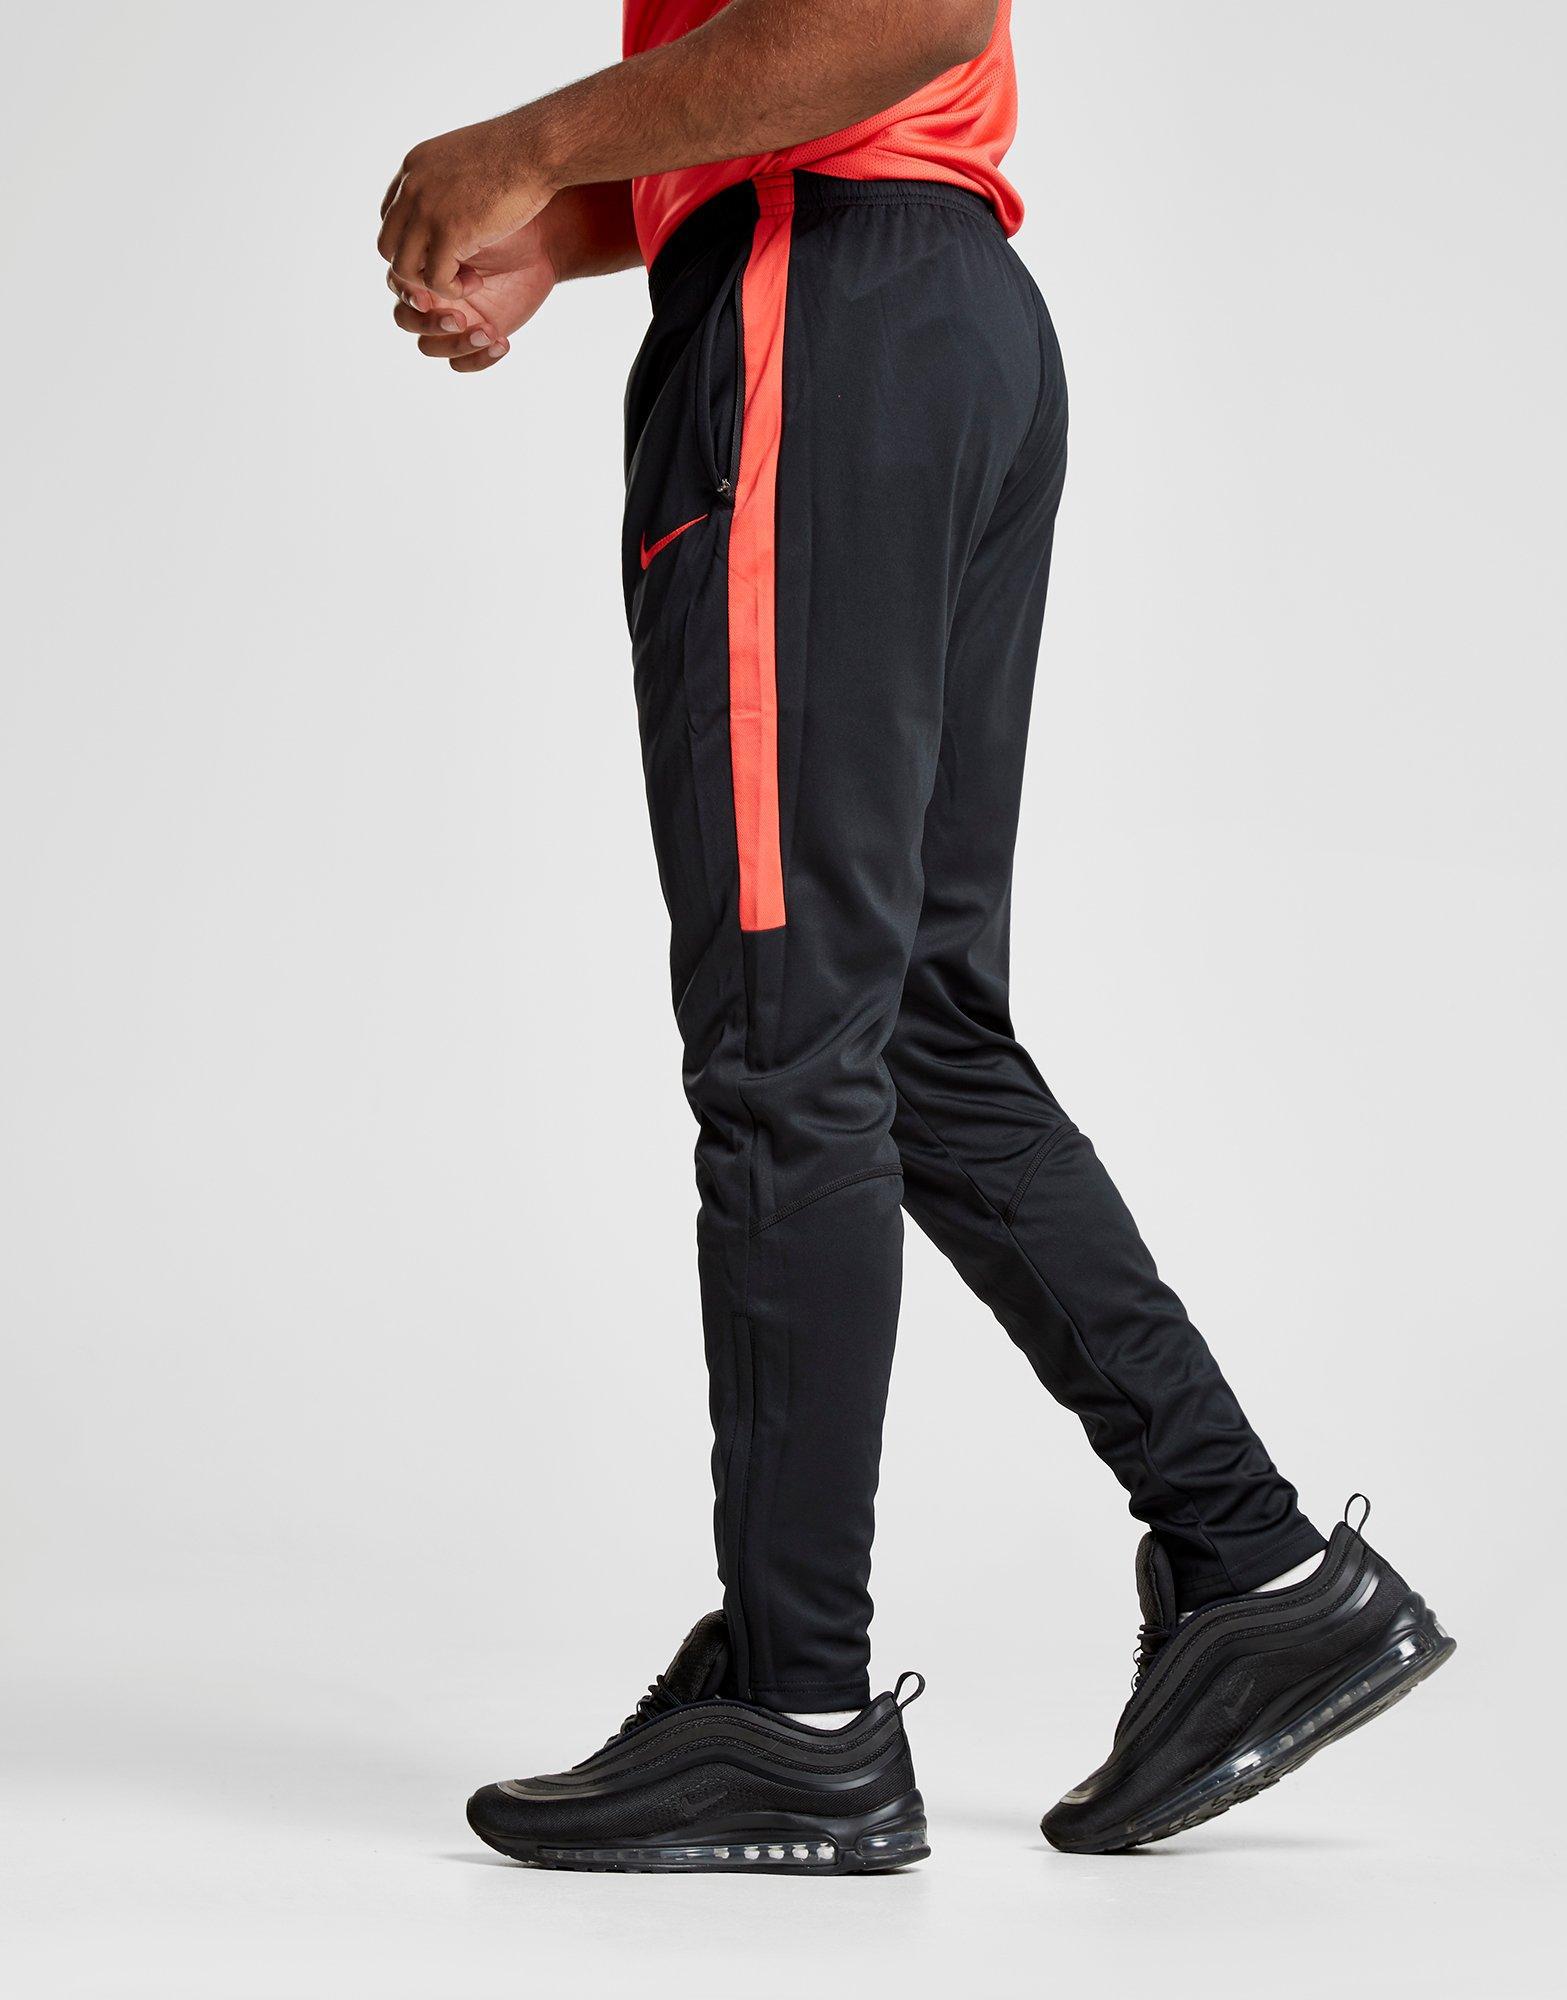 red and black nike pants